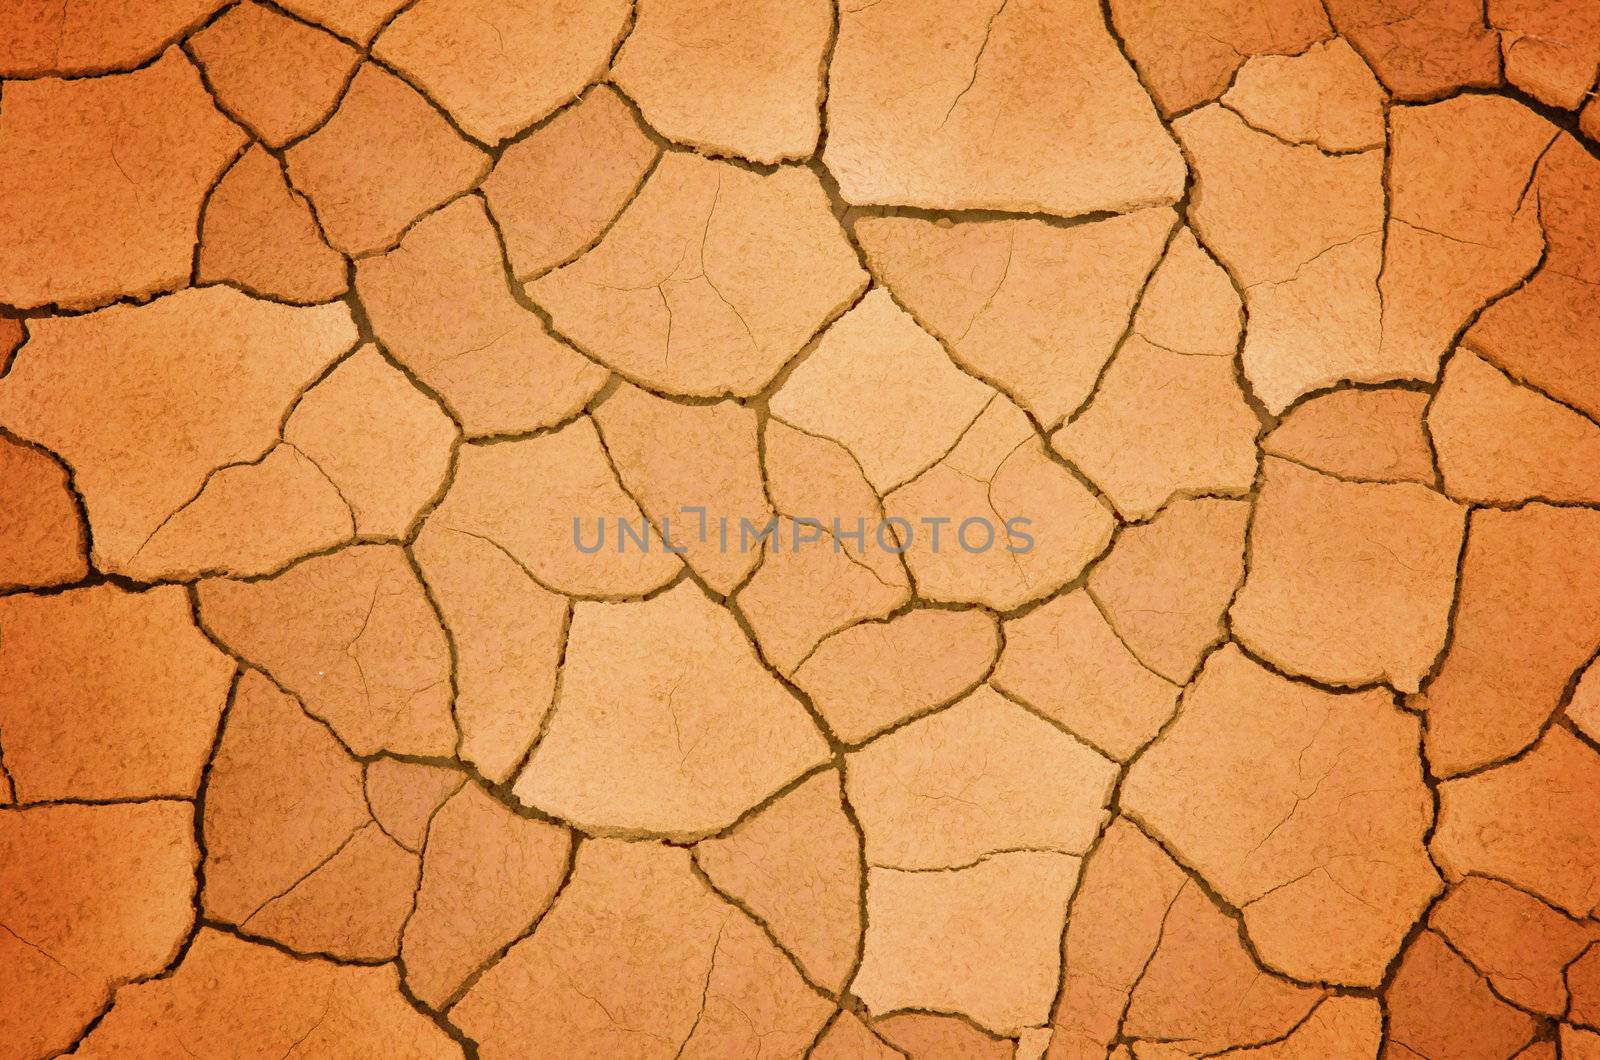 Dry cracked earth texture 